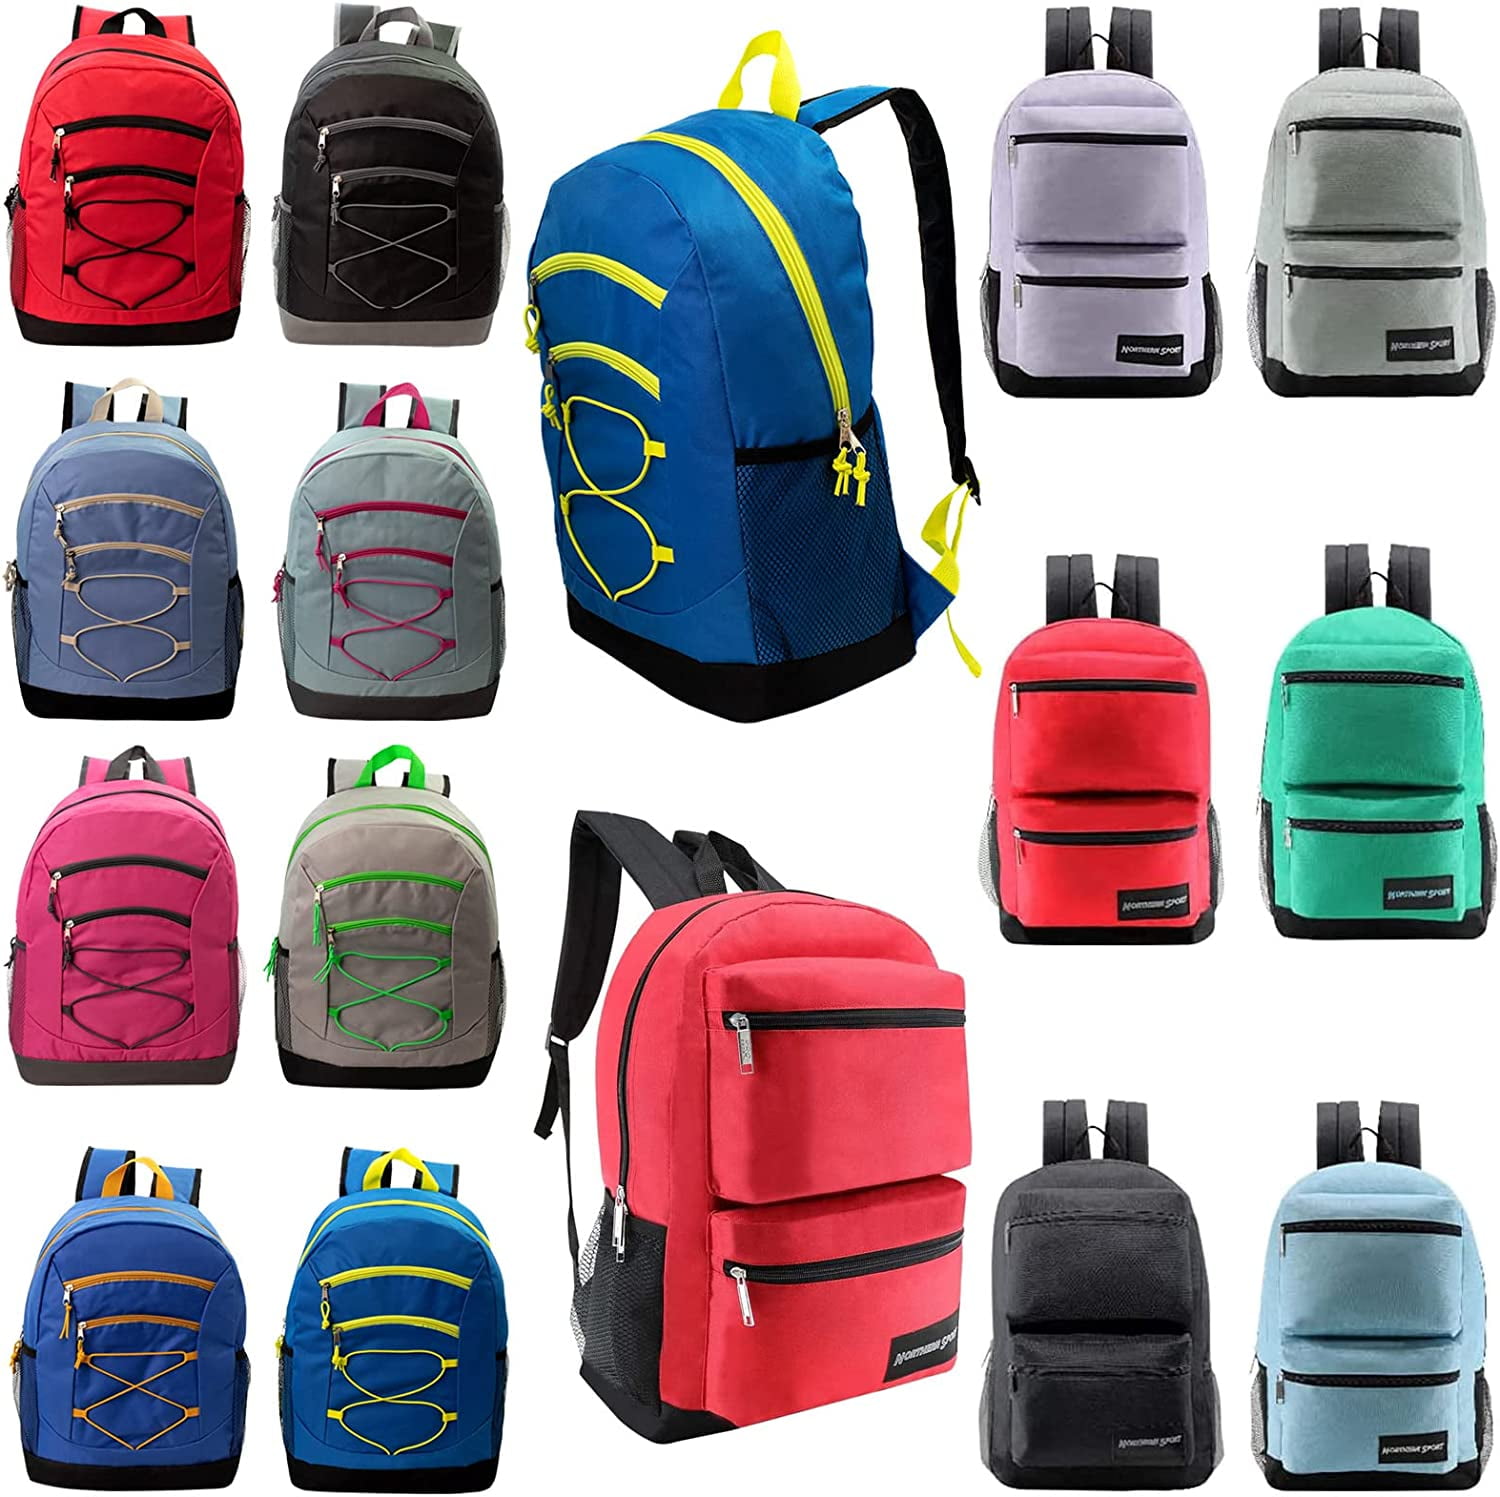 Dark Green 17 Inch Wholesale Backpack for Back to School Free Shipping